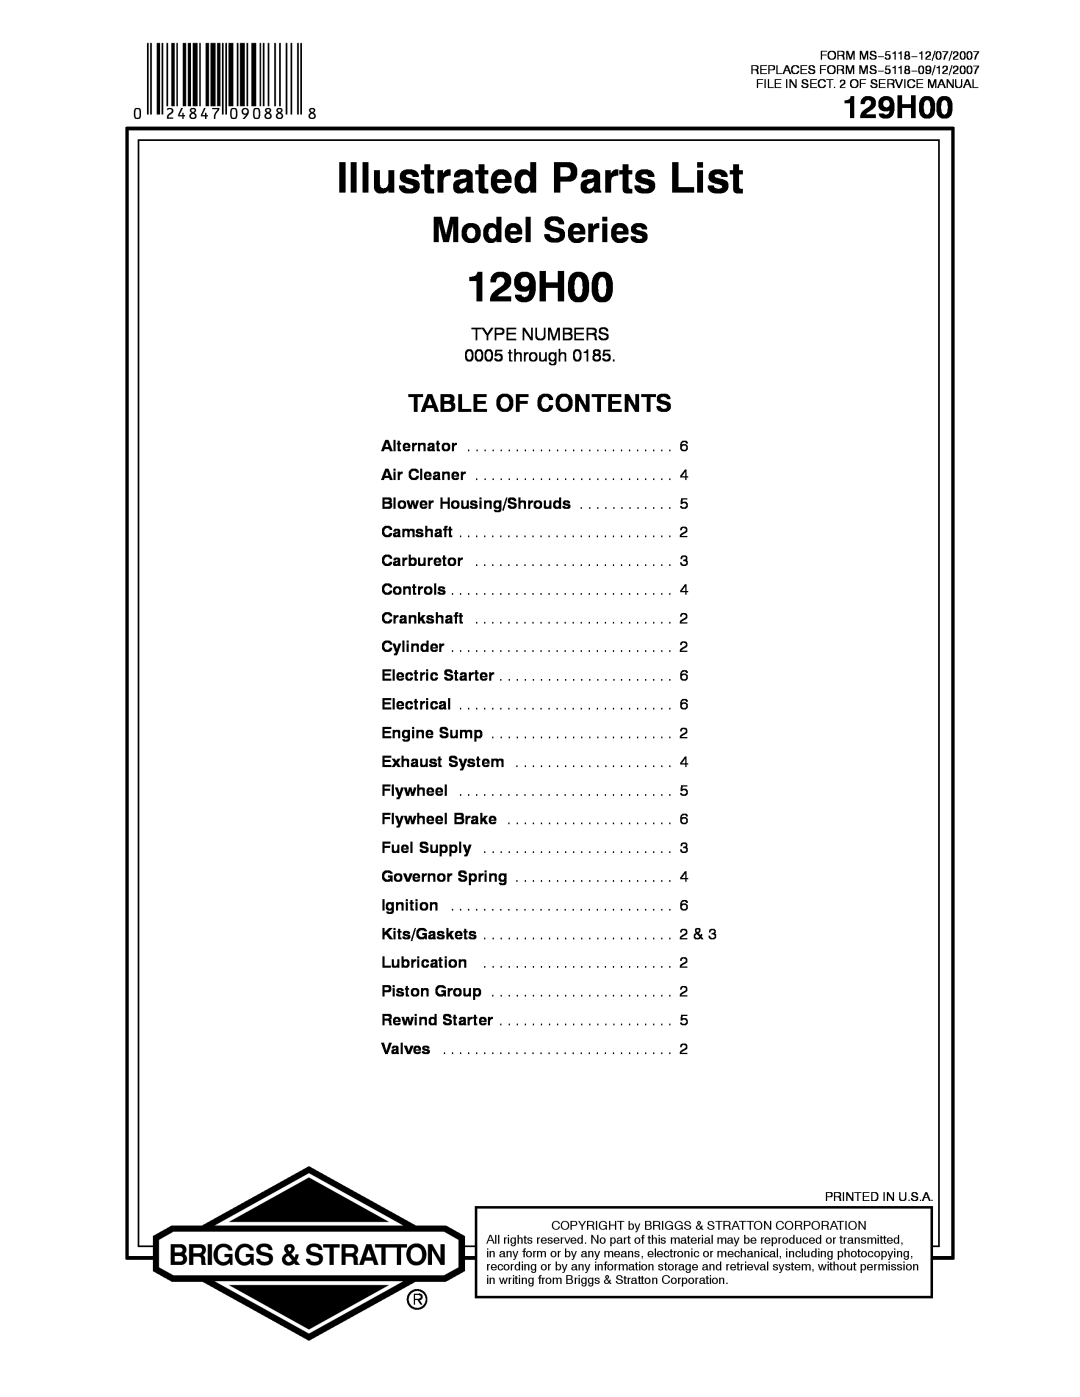 Briggs & Stratton 129H00 service manual Illustrated Parts List, Model Series, Table Of Contents, TYPE NUMBERS 0005 through 